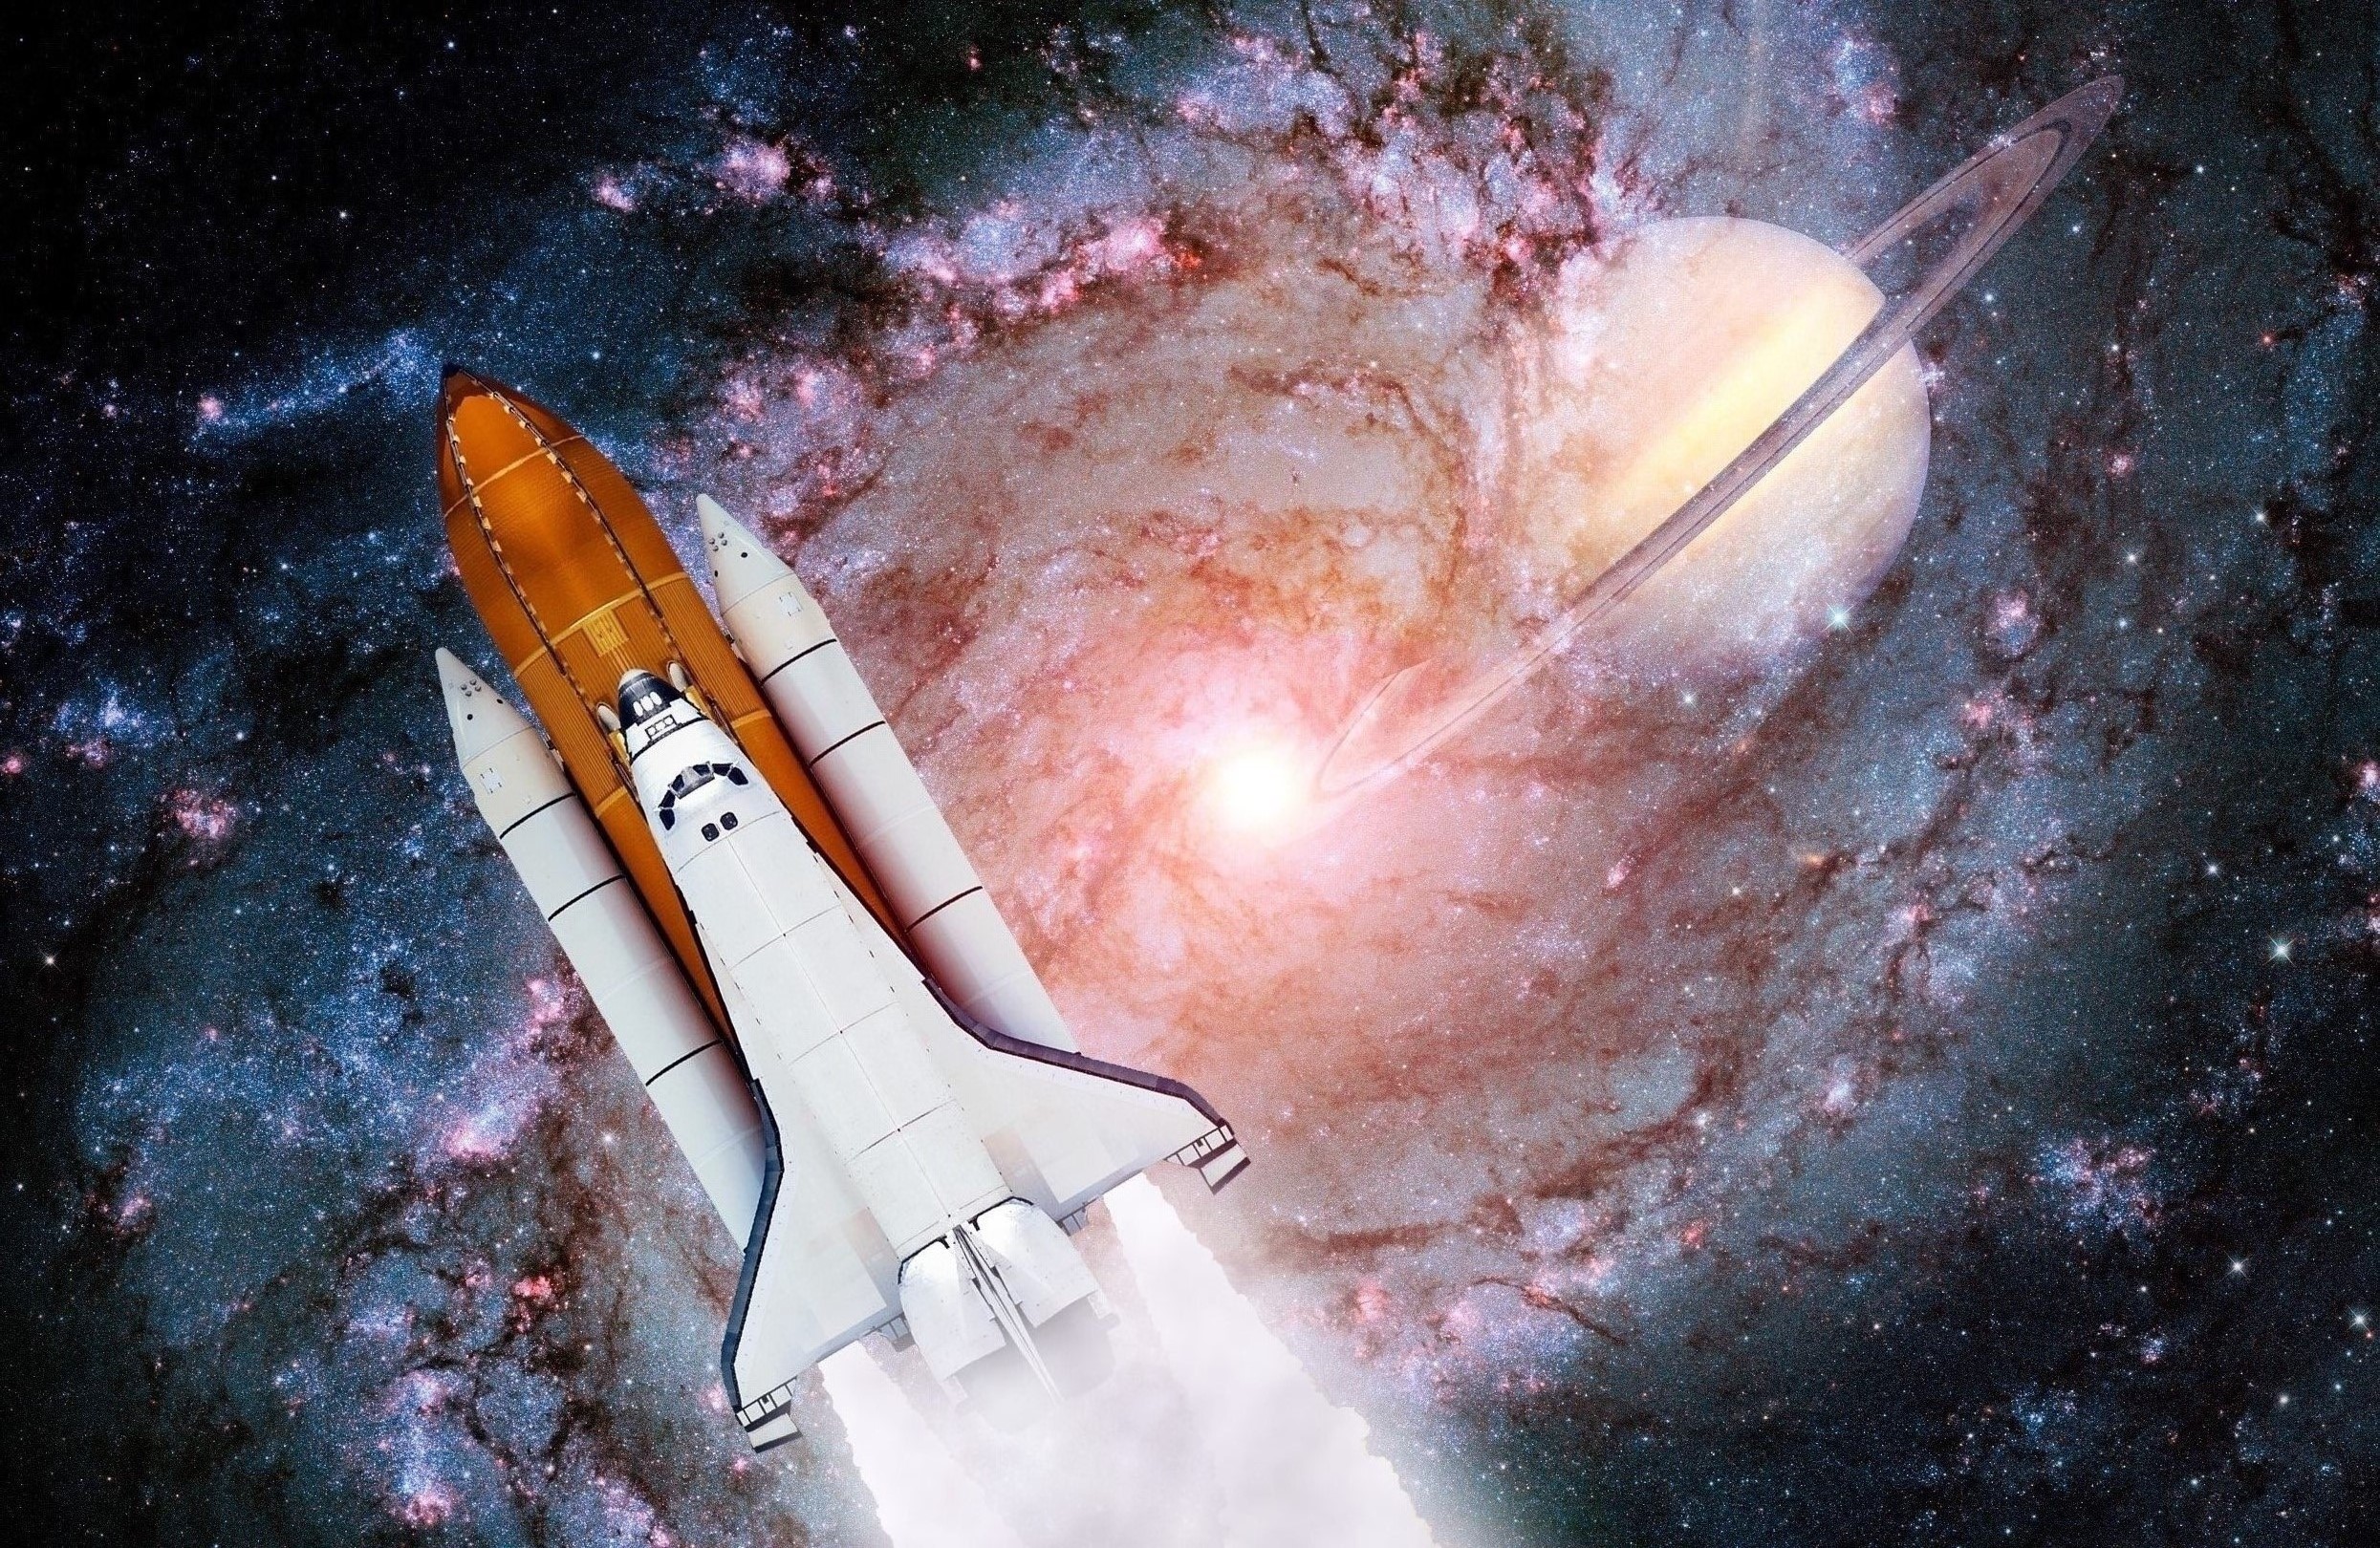 Vehicles Space Shuttle 2490x1620